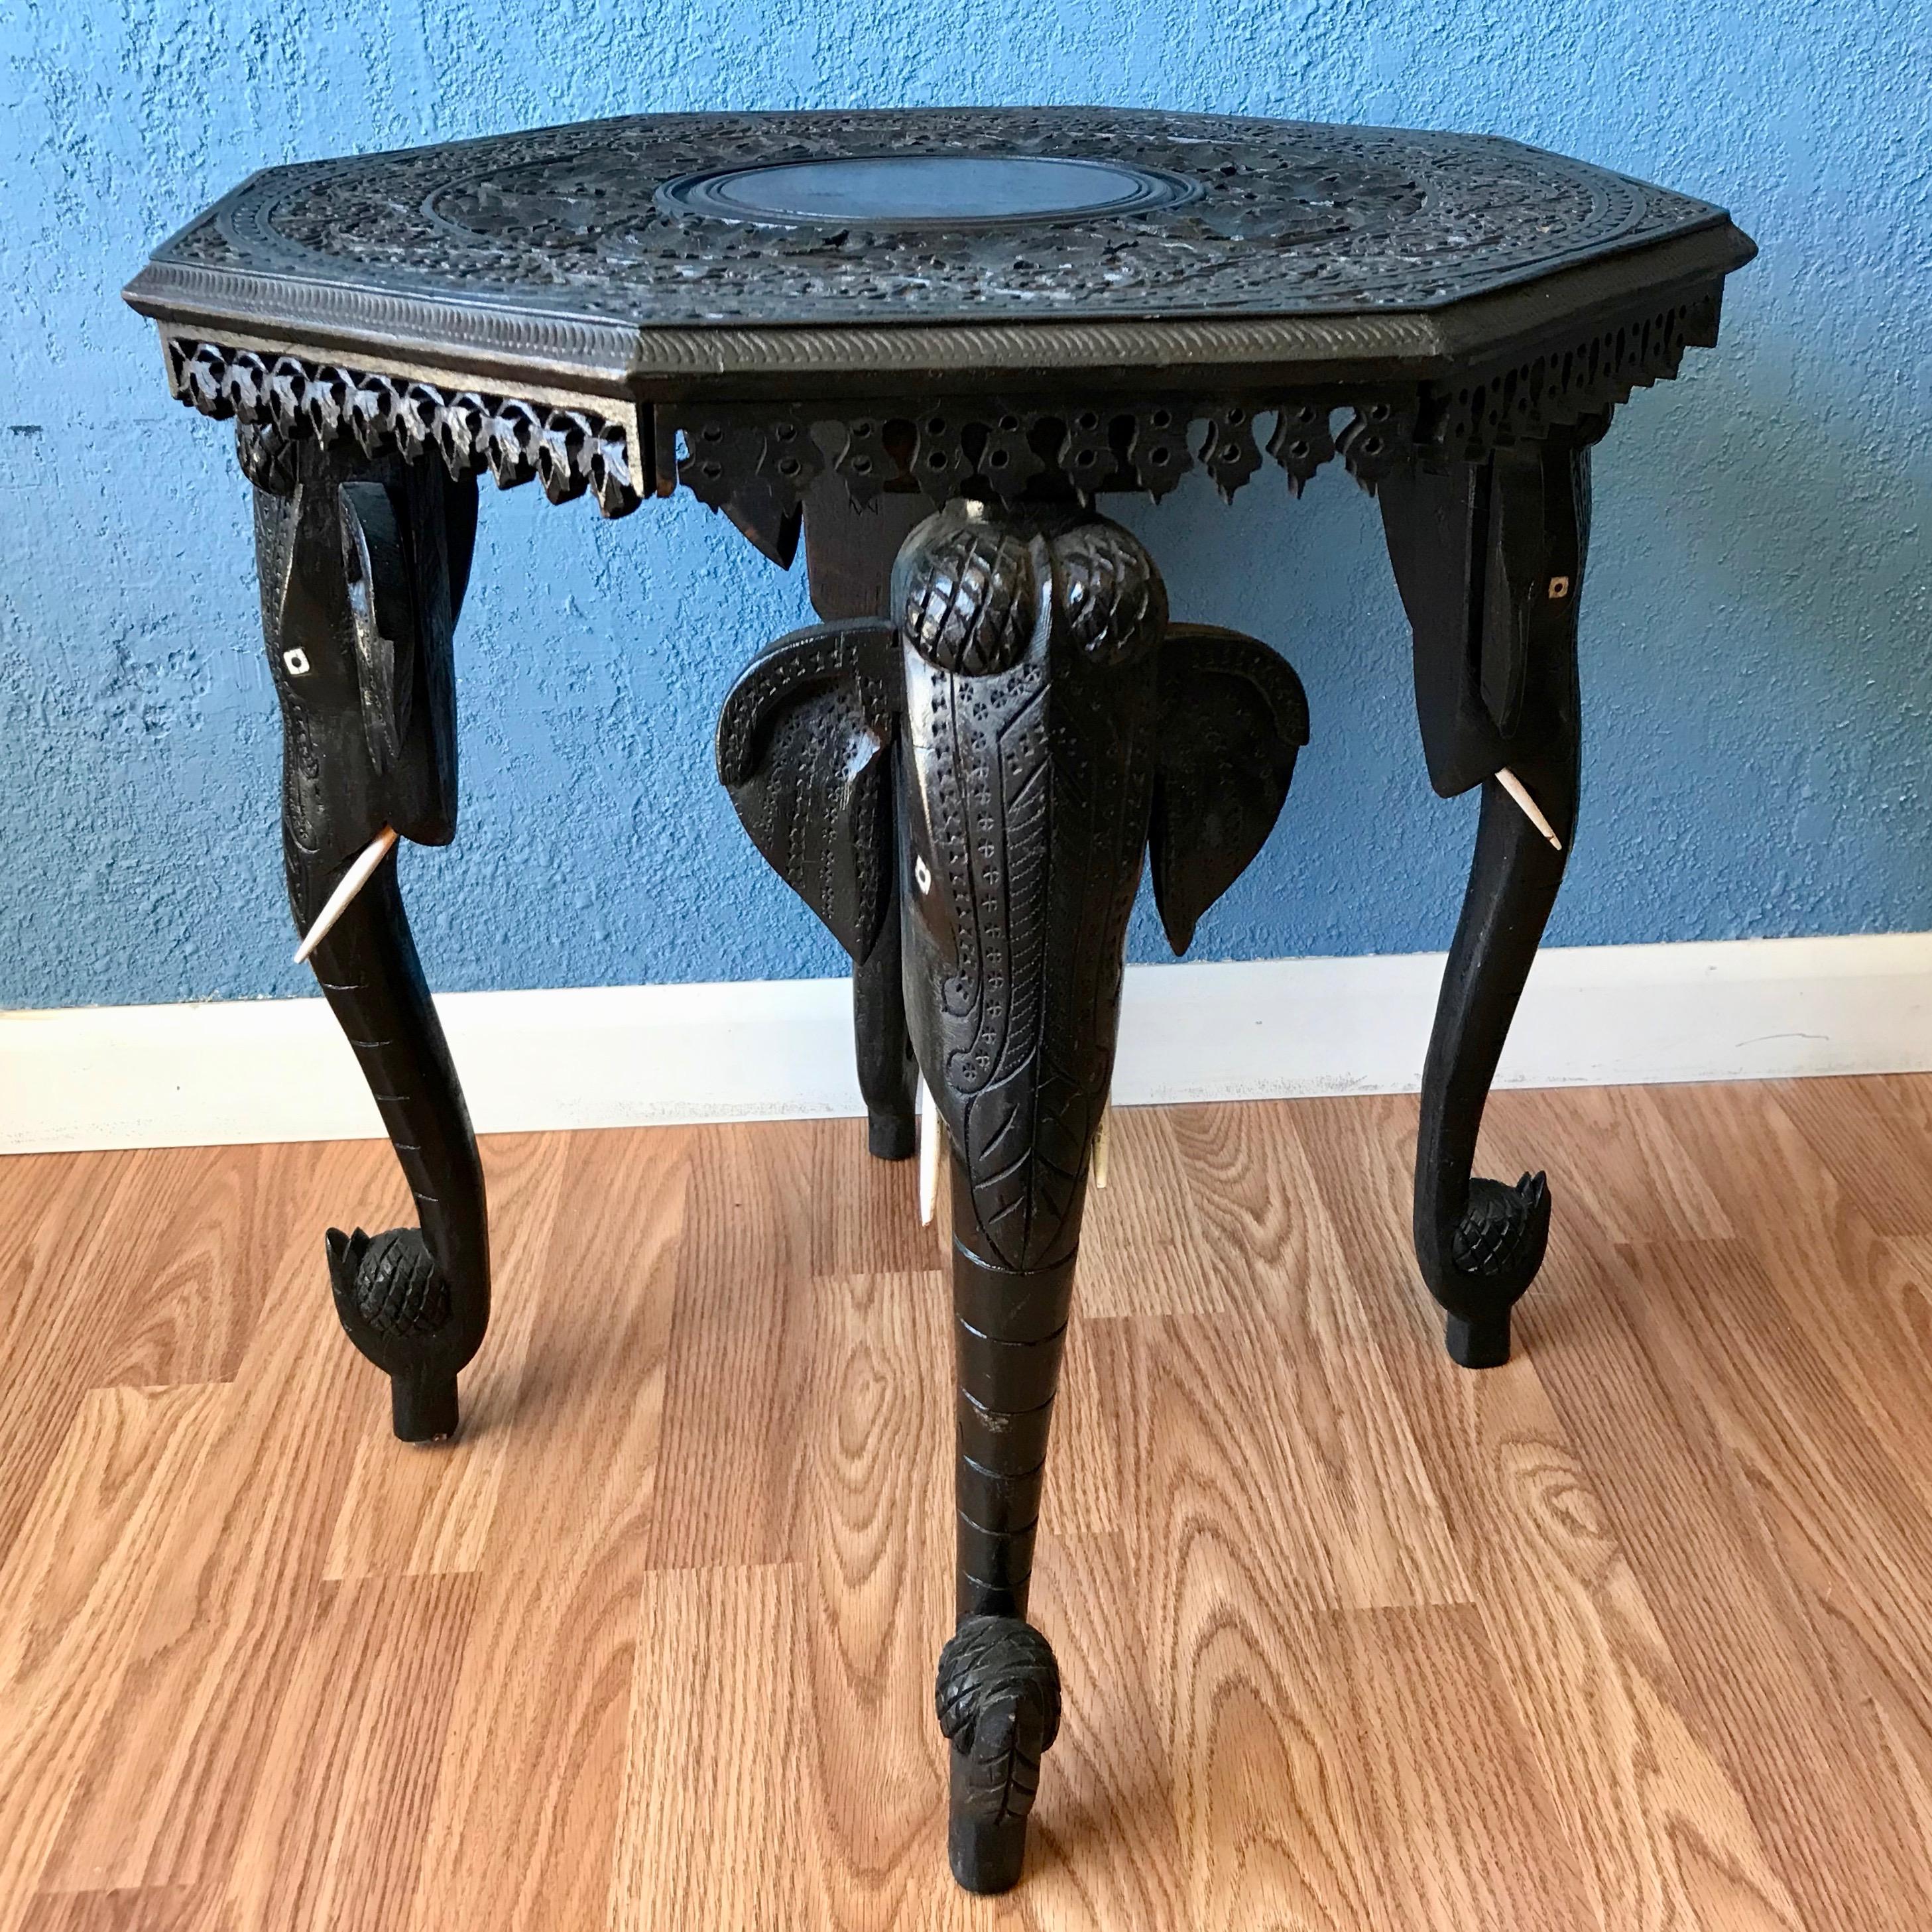 20th Century Anglo - Indian Elephant Motif Table